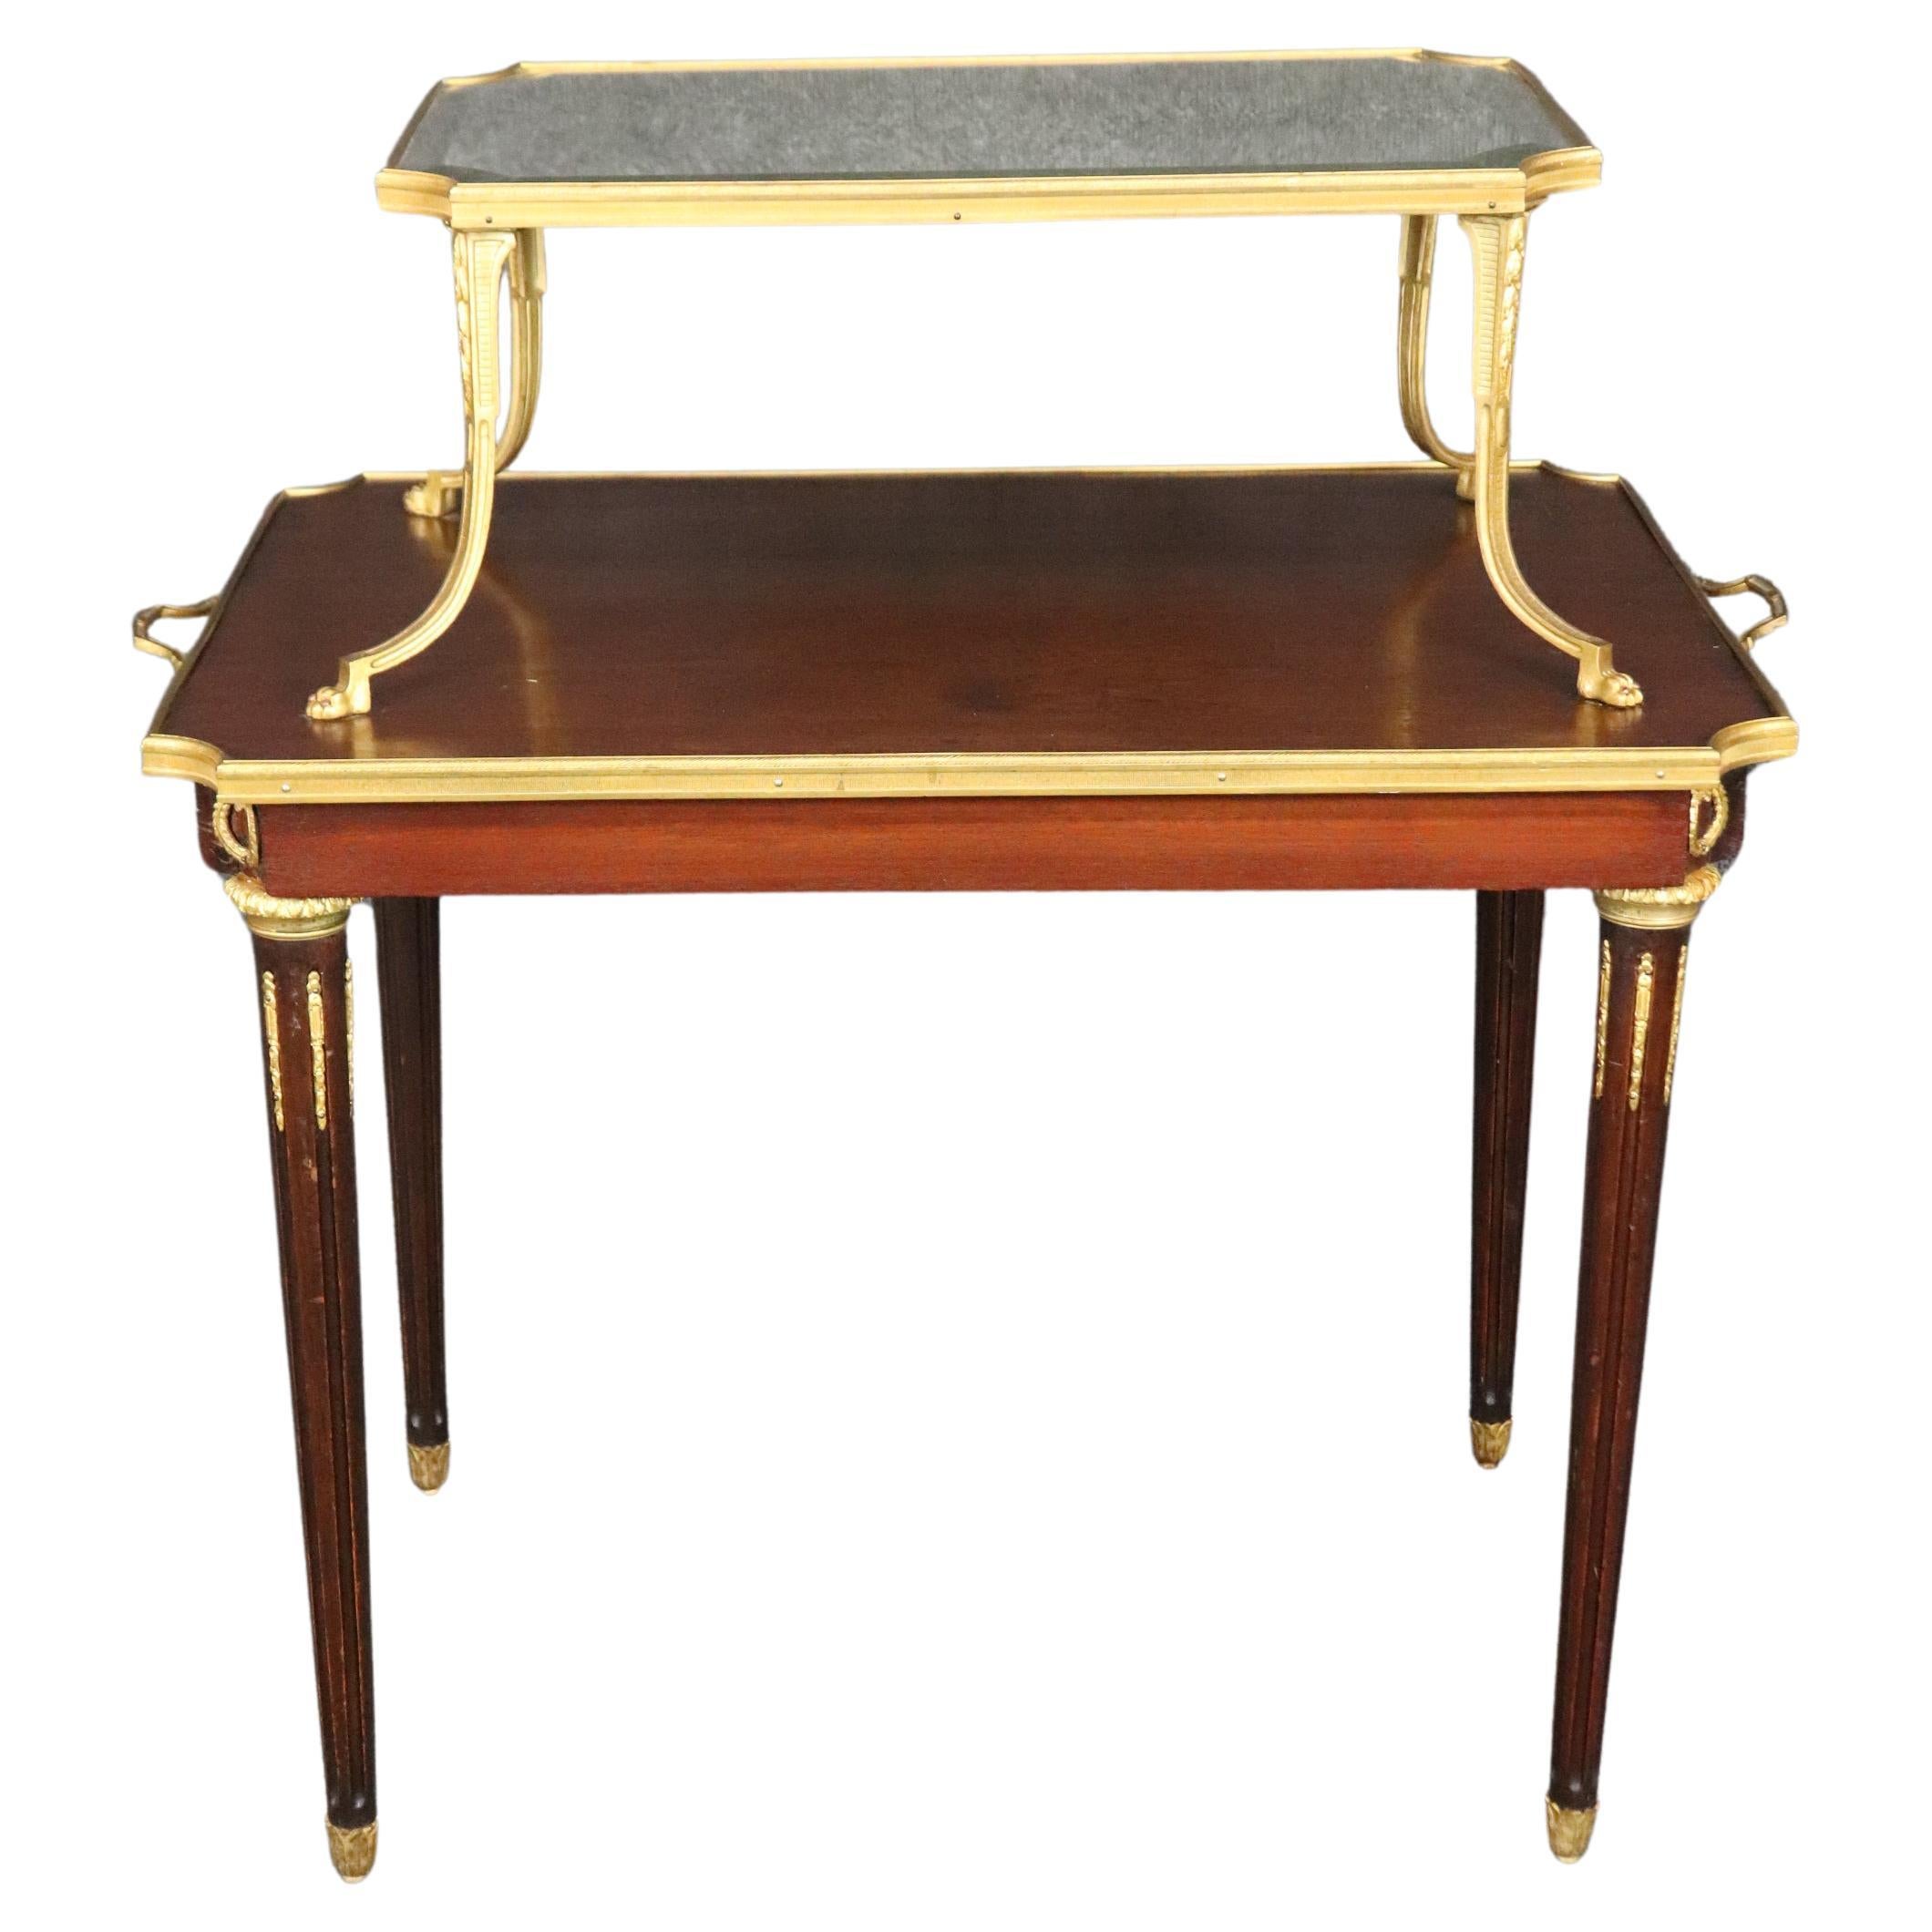 Fine Quality French Dore' Bronze and Mahogany Directoire Dessert Tray Top Table For Sale